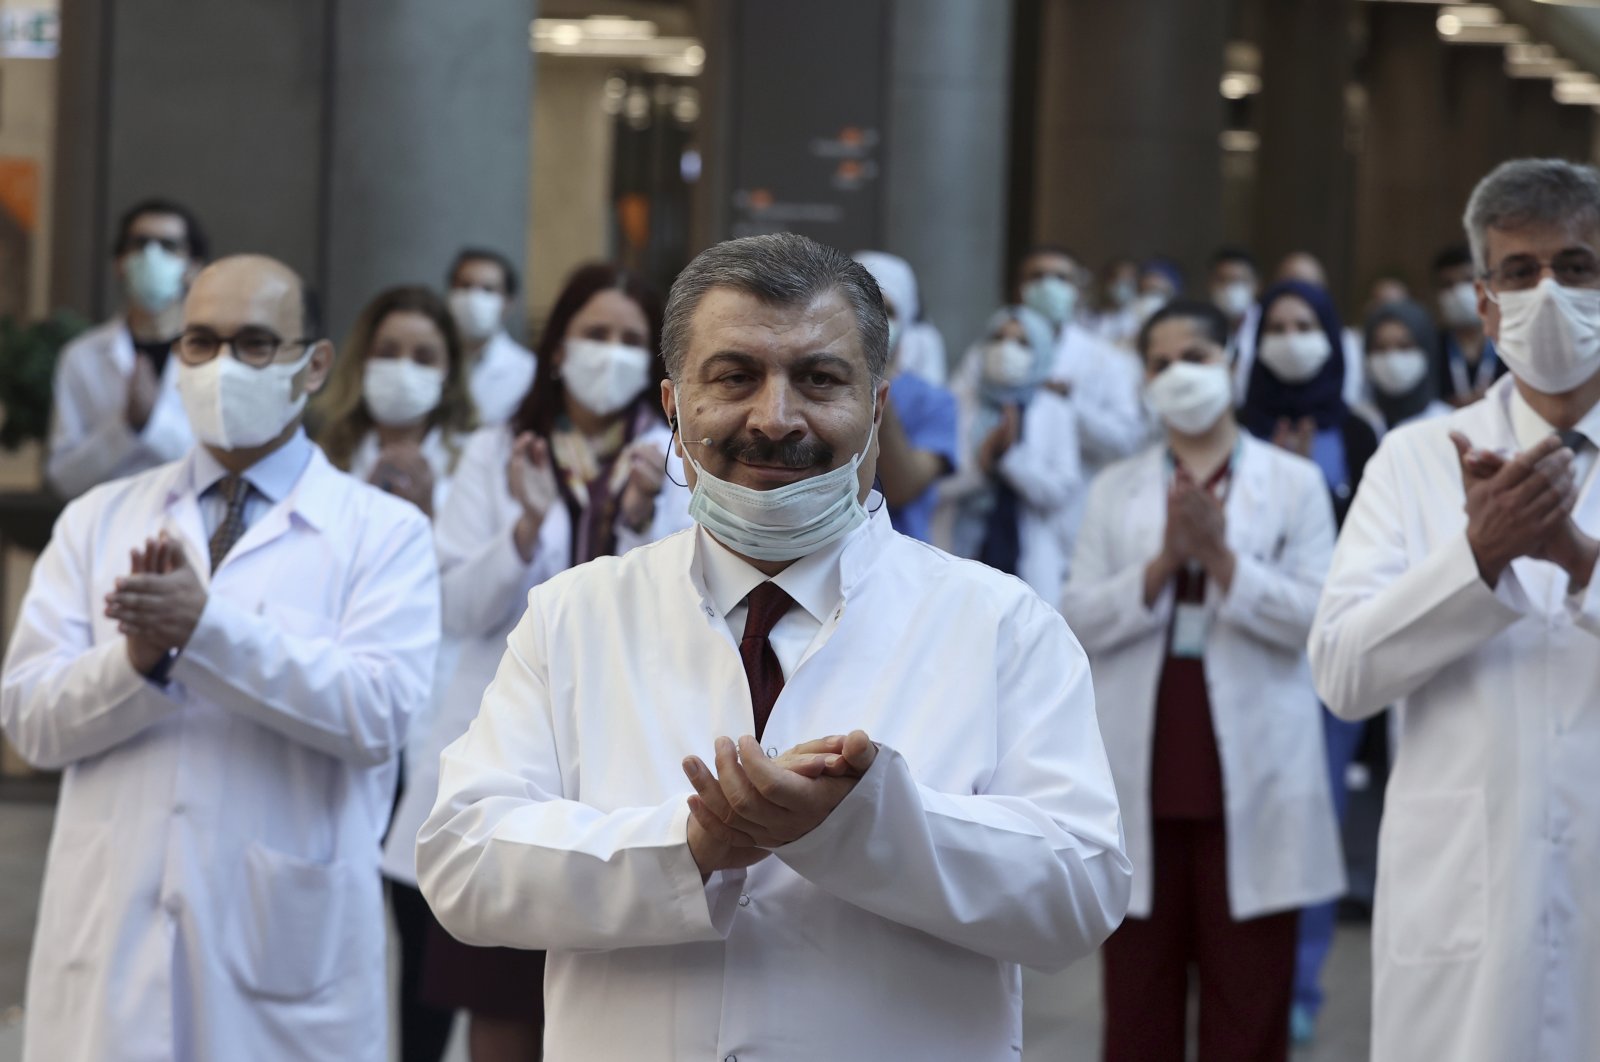 Turkish Health Minister Fahrettin Koca and medical official applaud during inauguration ceremony of the Başakşehir City Hospital, in Istanbul, Monday, April 20, 2020. President Recep Tayyip Erdoğan inaugurated a 2,600-bed public hospital via teleconference in Istanbul, whose construction was expedited amid the new coronavirus outbreak. (AP Photo)